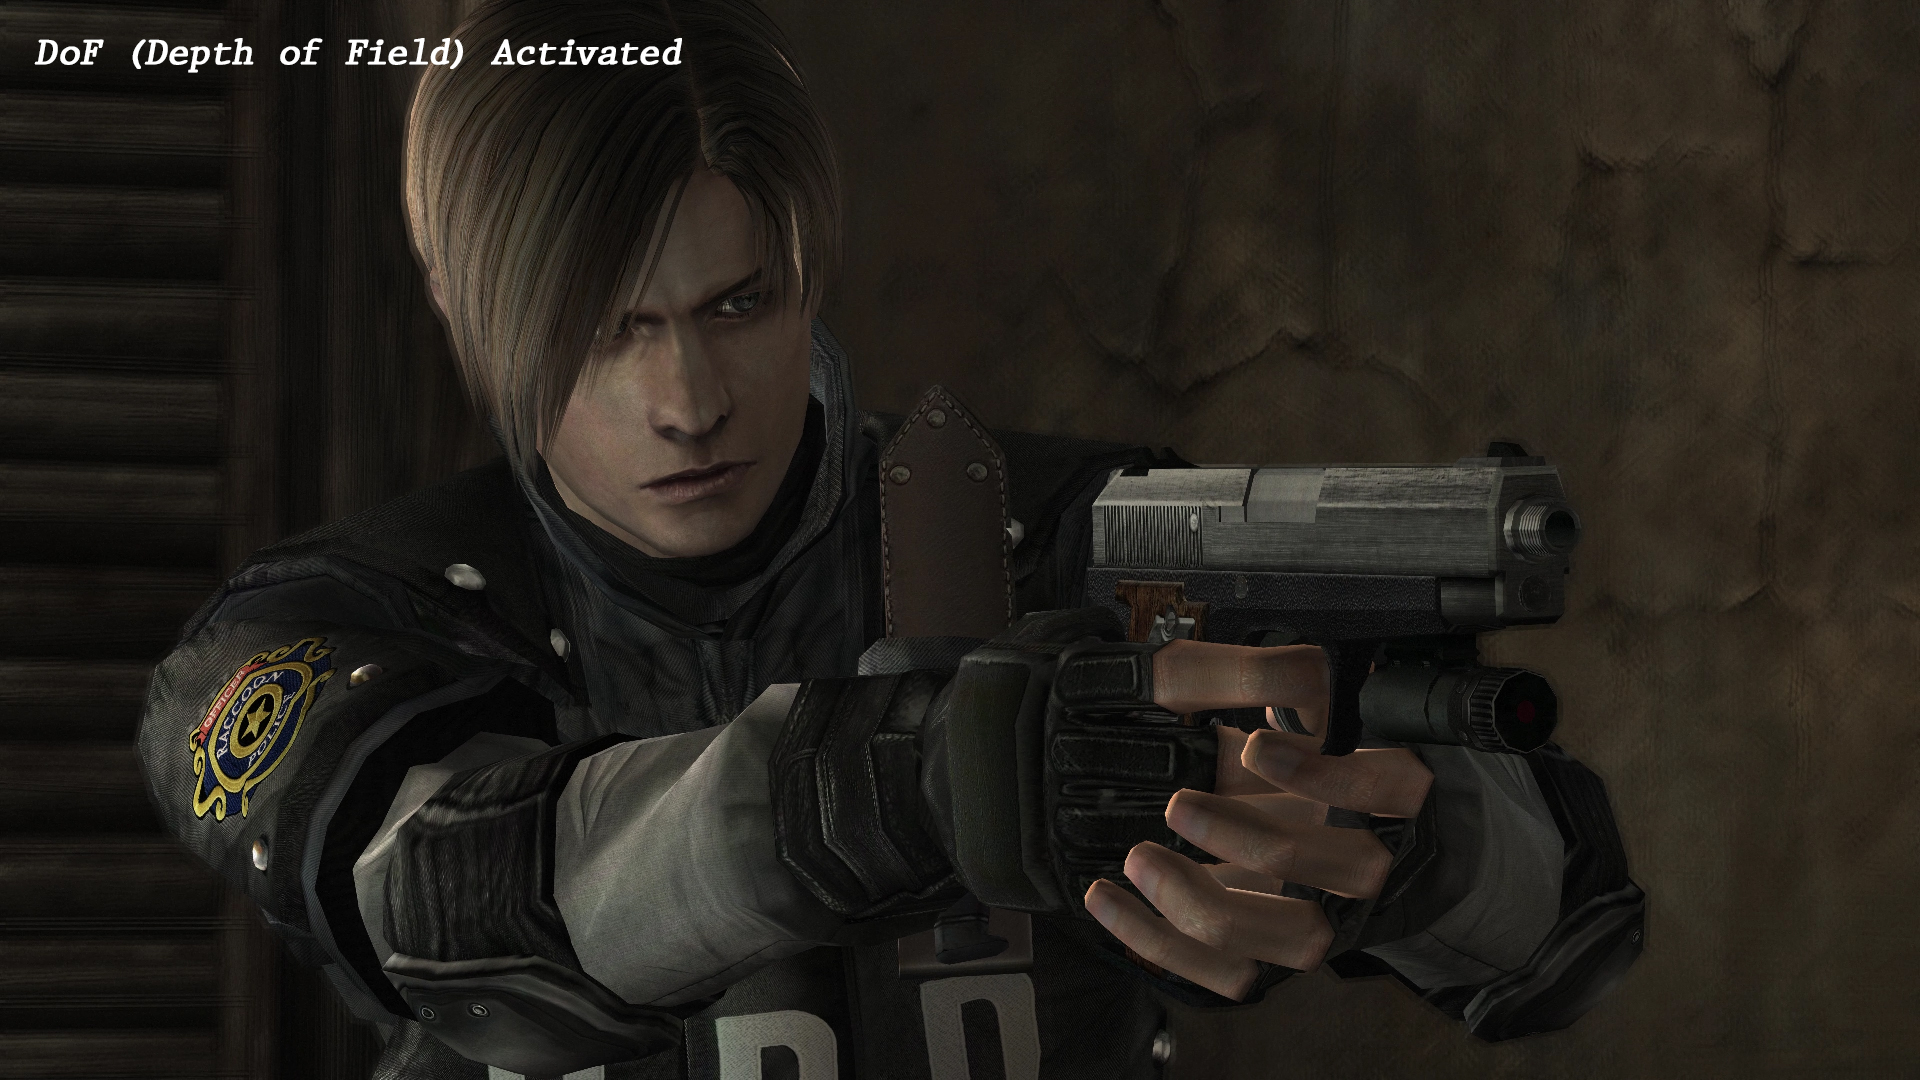 Resident Evil 4 HD project mod now available to download